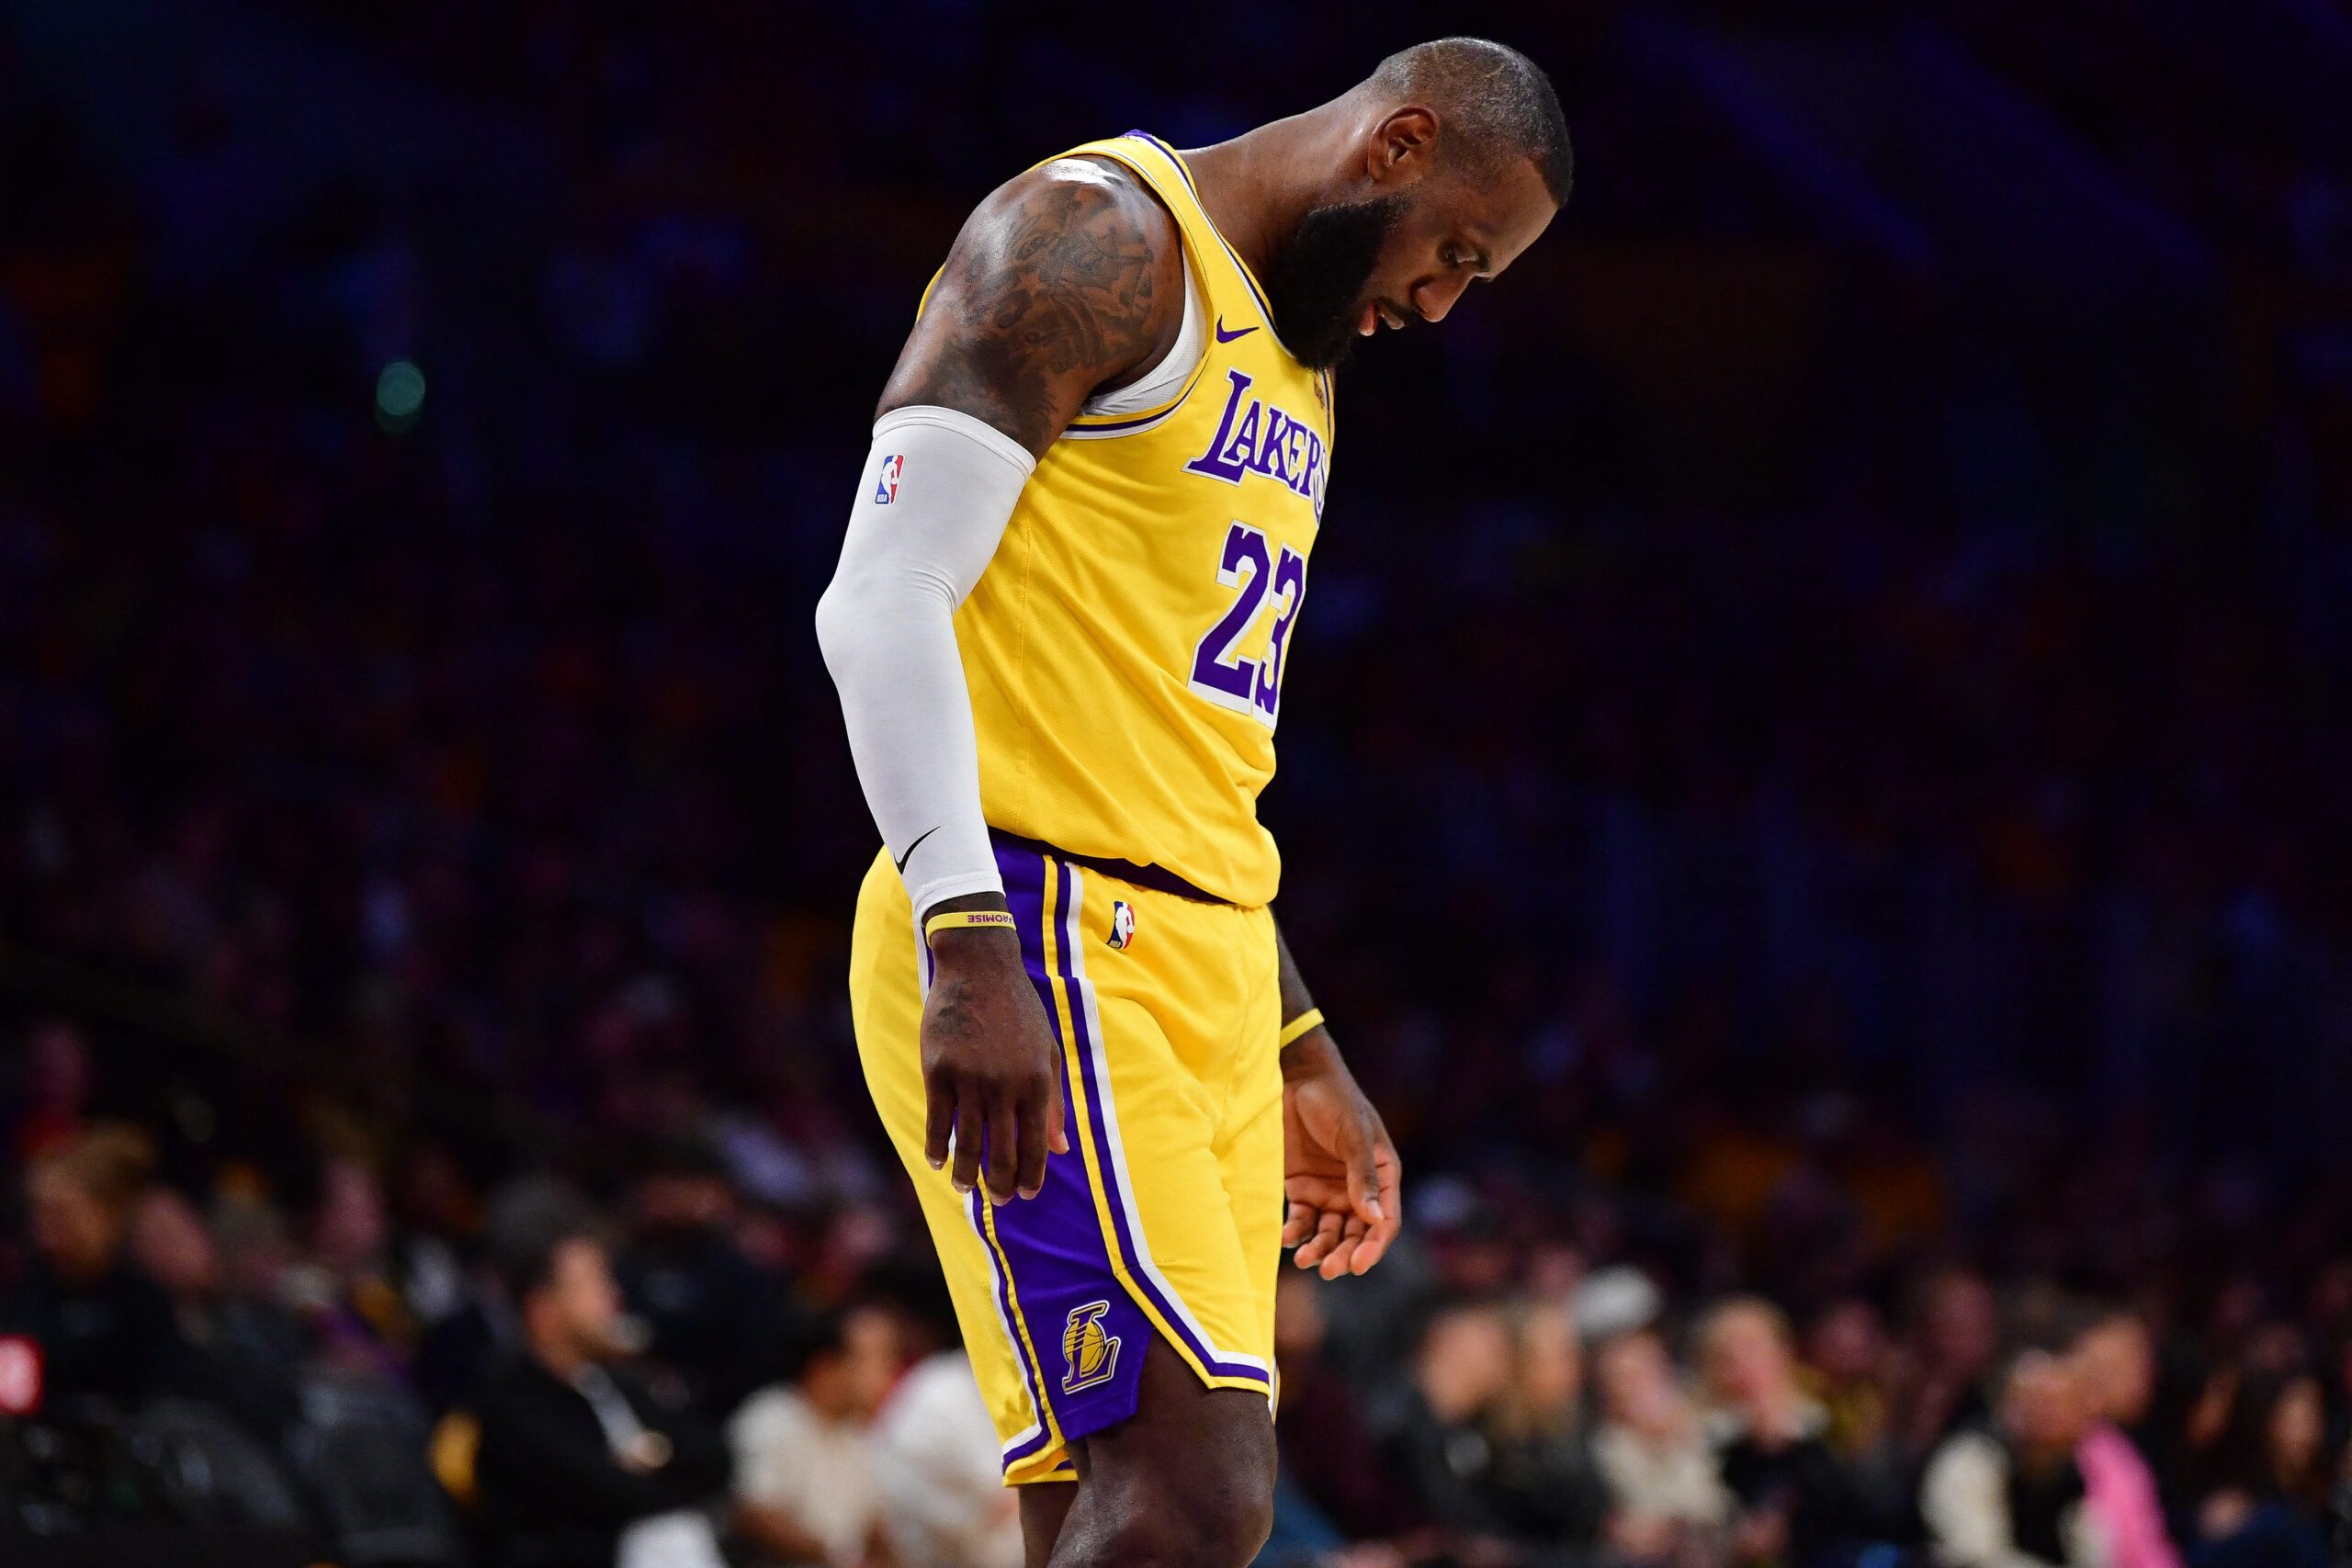 39-year-old LeBron James undecided on future after Lakers’ ouster